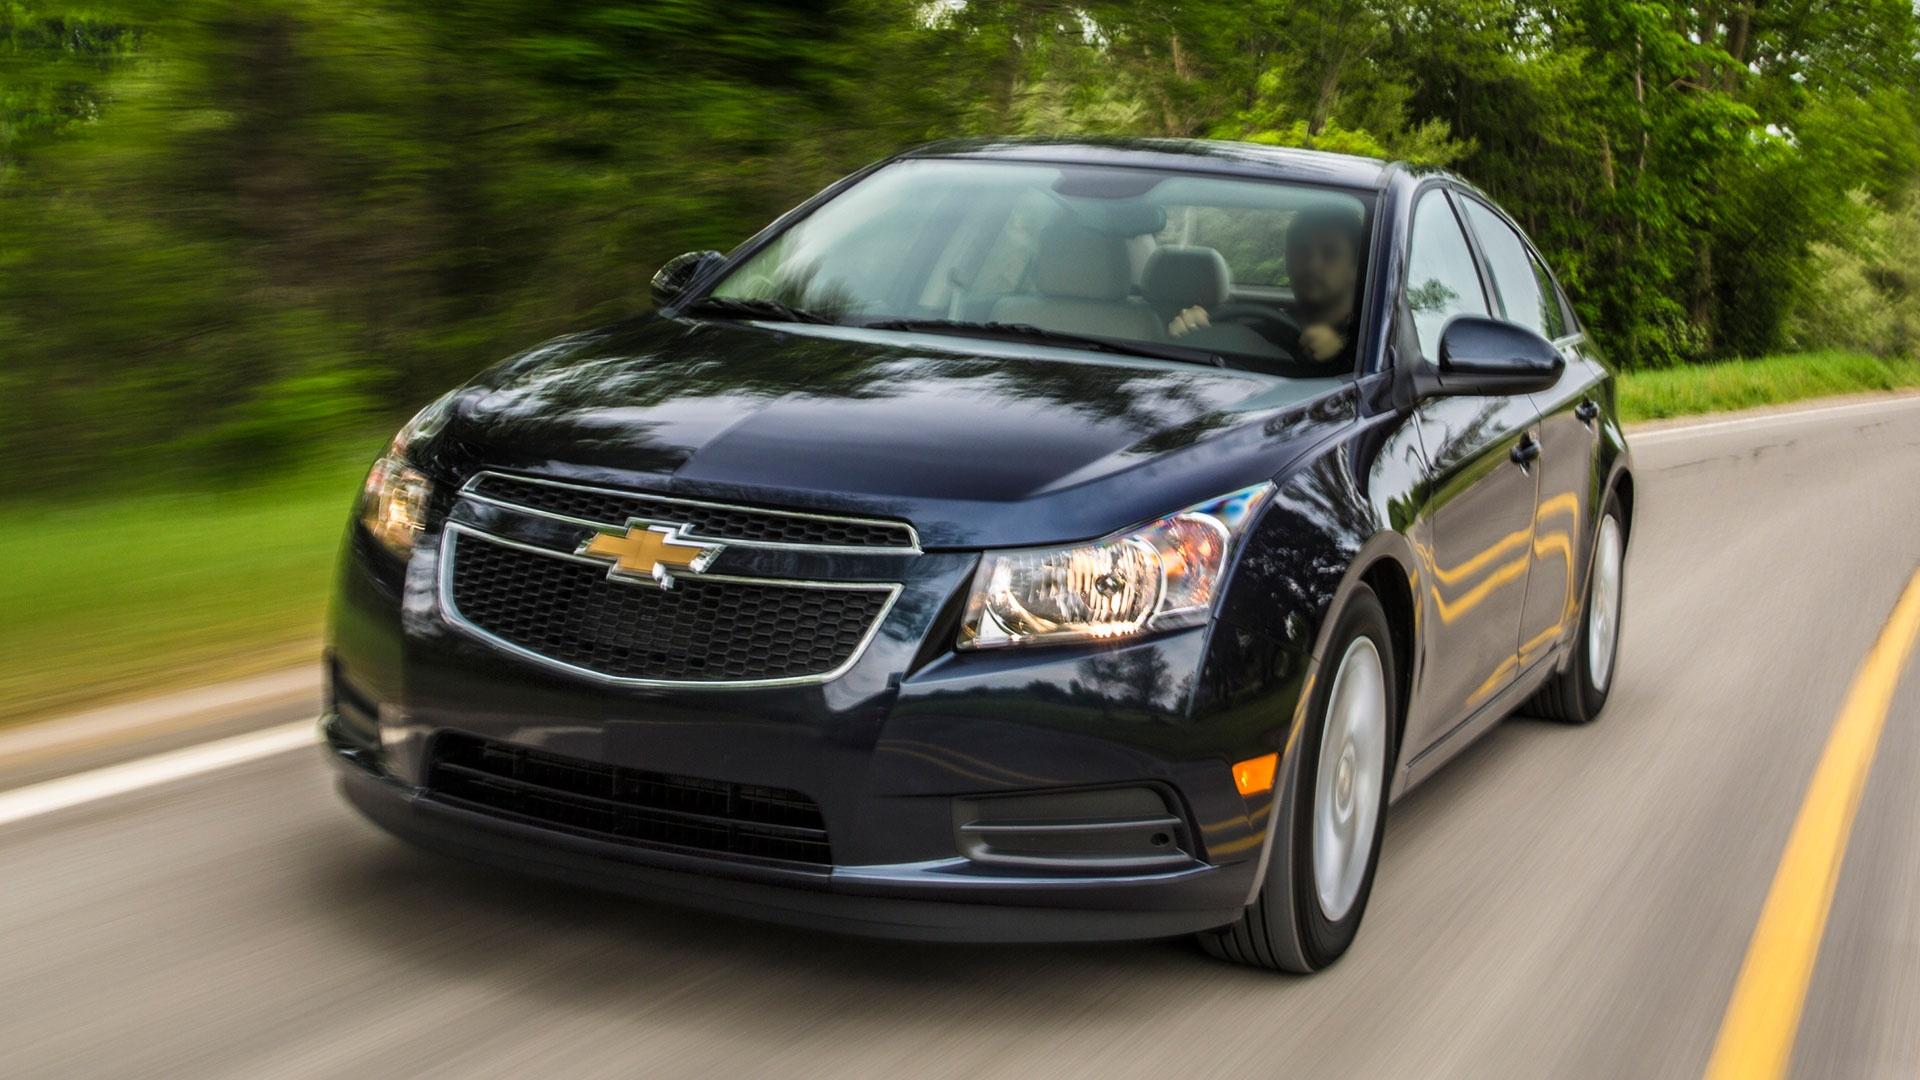 Chevy Cruze Diesel is ideal for highway commuters